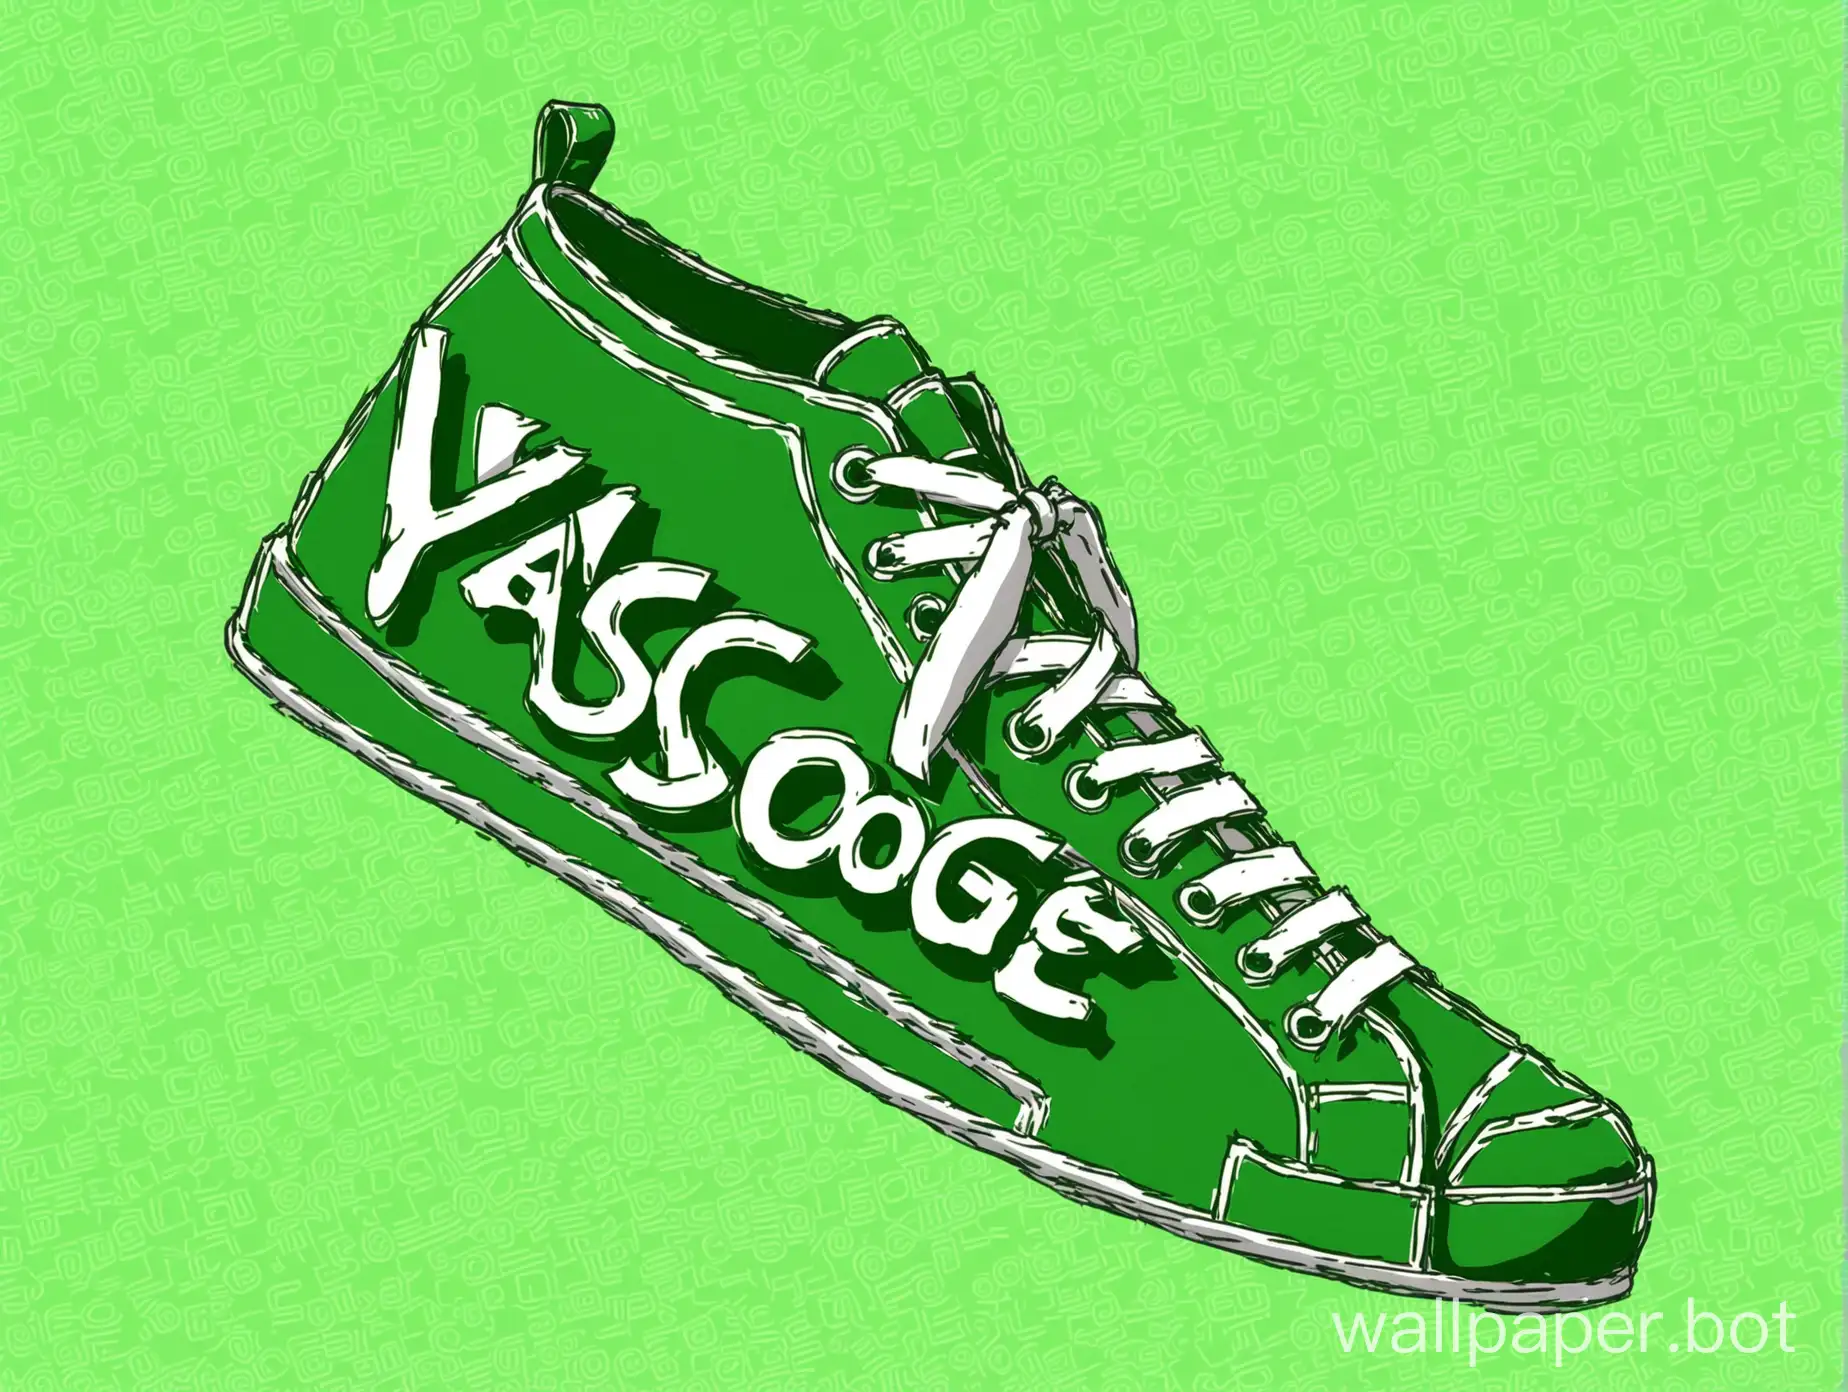 make walapaper shoe with green theme background , but cool the name YASOGE